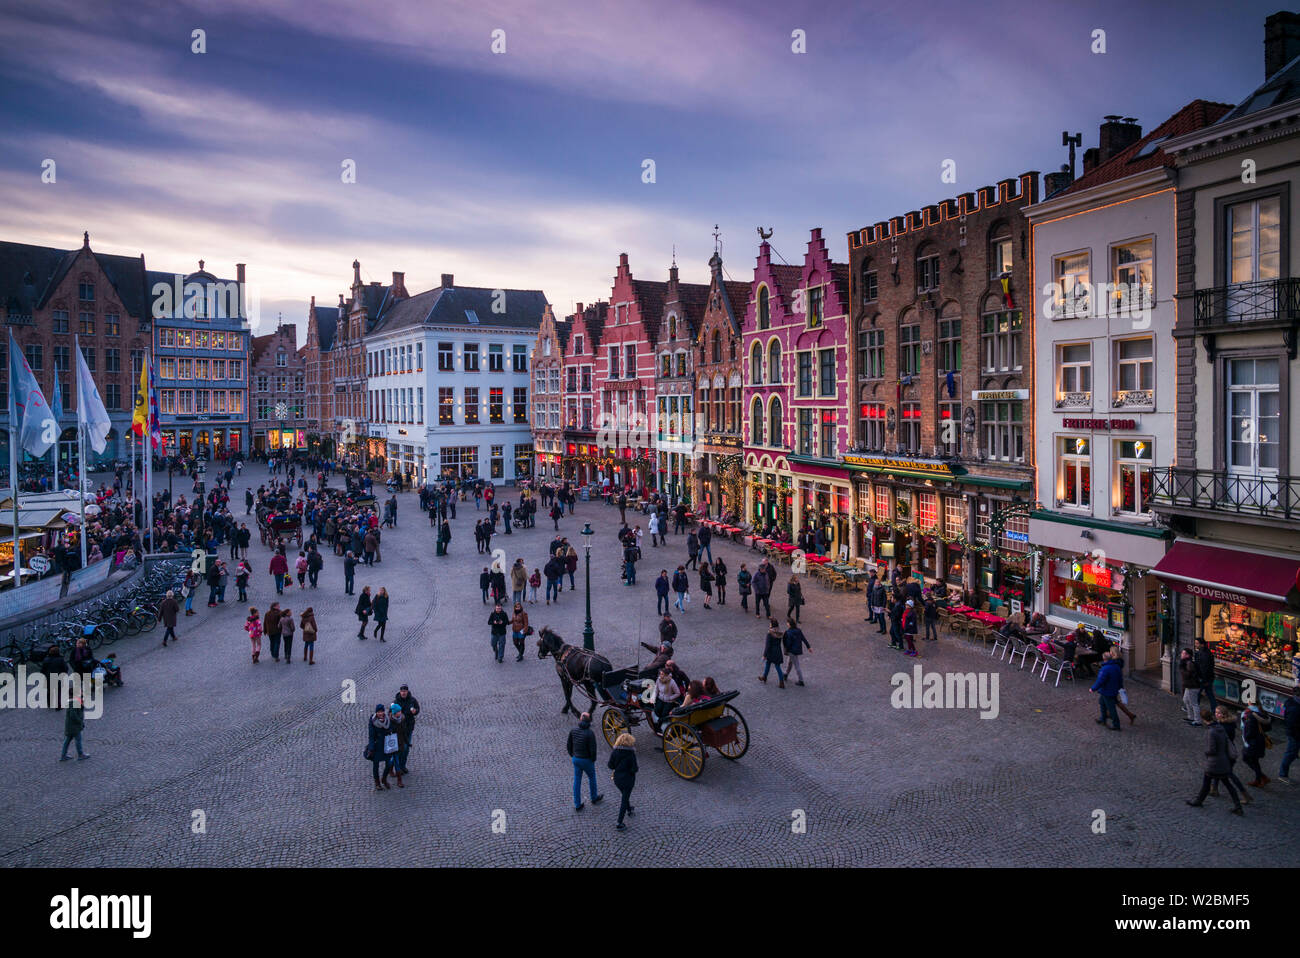 Belgium, Bruges, The Markt, elevated view of main square buildings, dusk Stock Photo